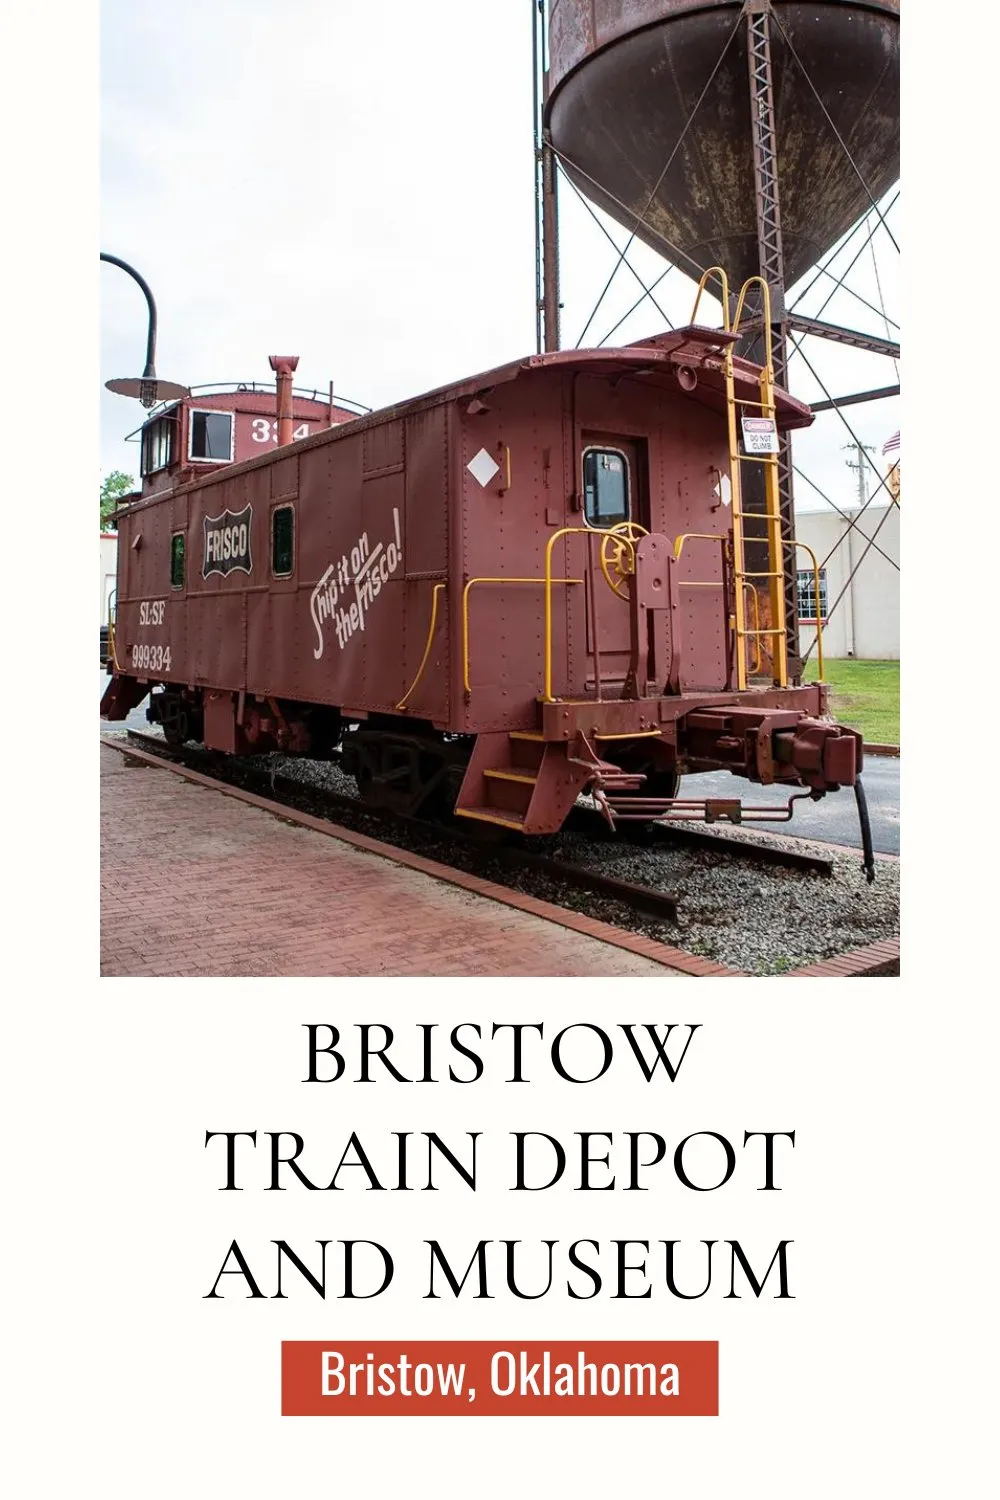 Step back in time and explore the historic Bristow Train Depot and Museum in Bristow, Oklahoma. Housed in a 1923 FRISCO Train Depot, this museum and visitor's center gives patrons a glimpse into the town's history. Outside find an Atchison, Topeka & Santa Fe Railway caboose on display. Also find one of the only two remaining FRISCO water towers in the nation. Visit this Route 66 attraction on your Oklahoma road trip. #Route66 #Route66RoadTrip #OklahomaRoute66 #OklahomaRoadTrip #RoadTrip